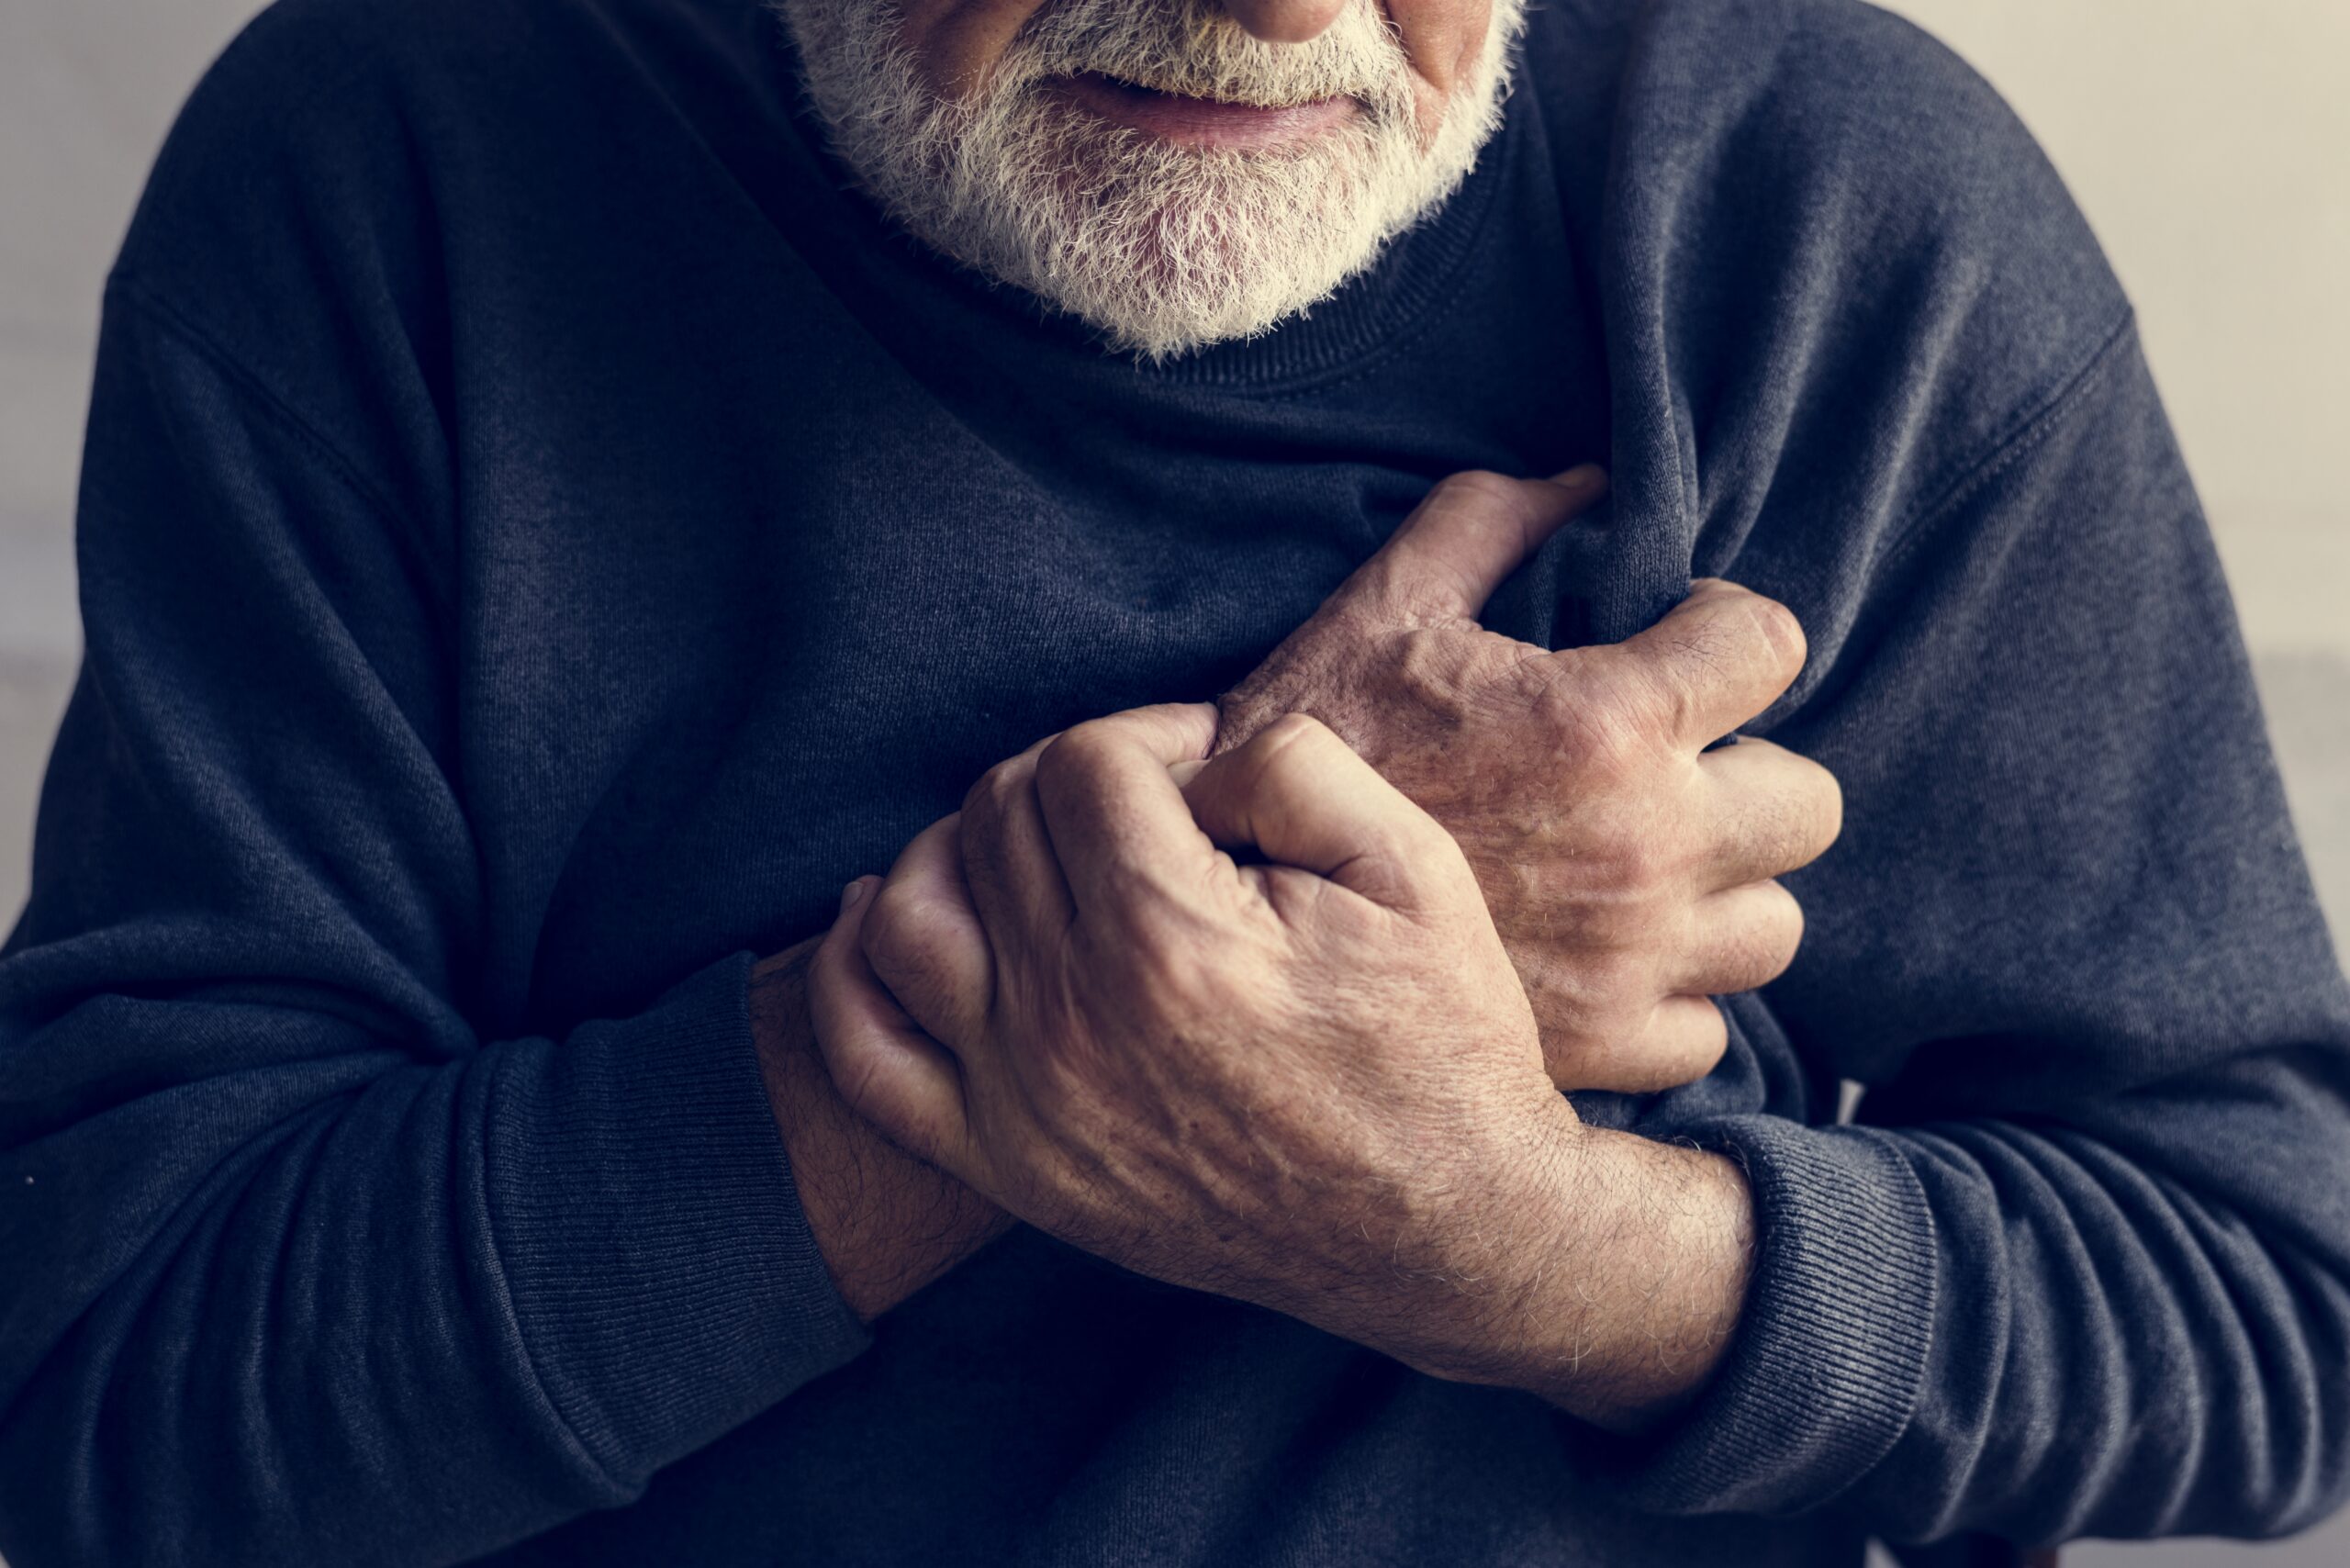 Featured image for “Recognizing the Symptoms and Warning Signs of a Heart Attack”